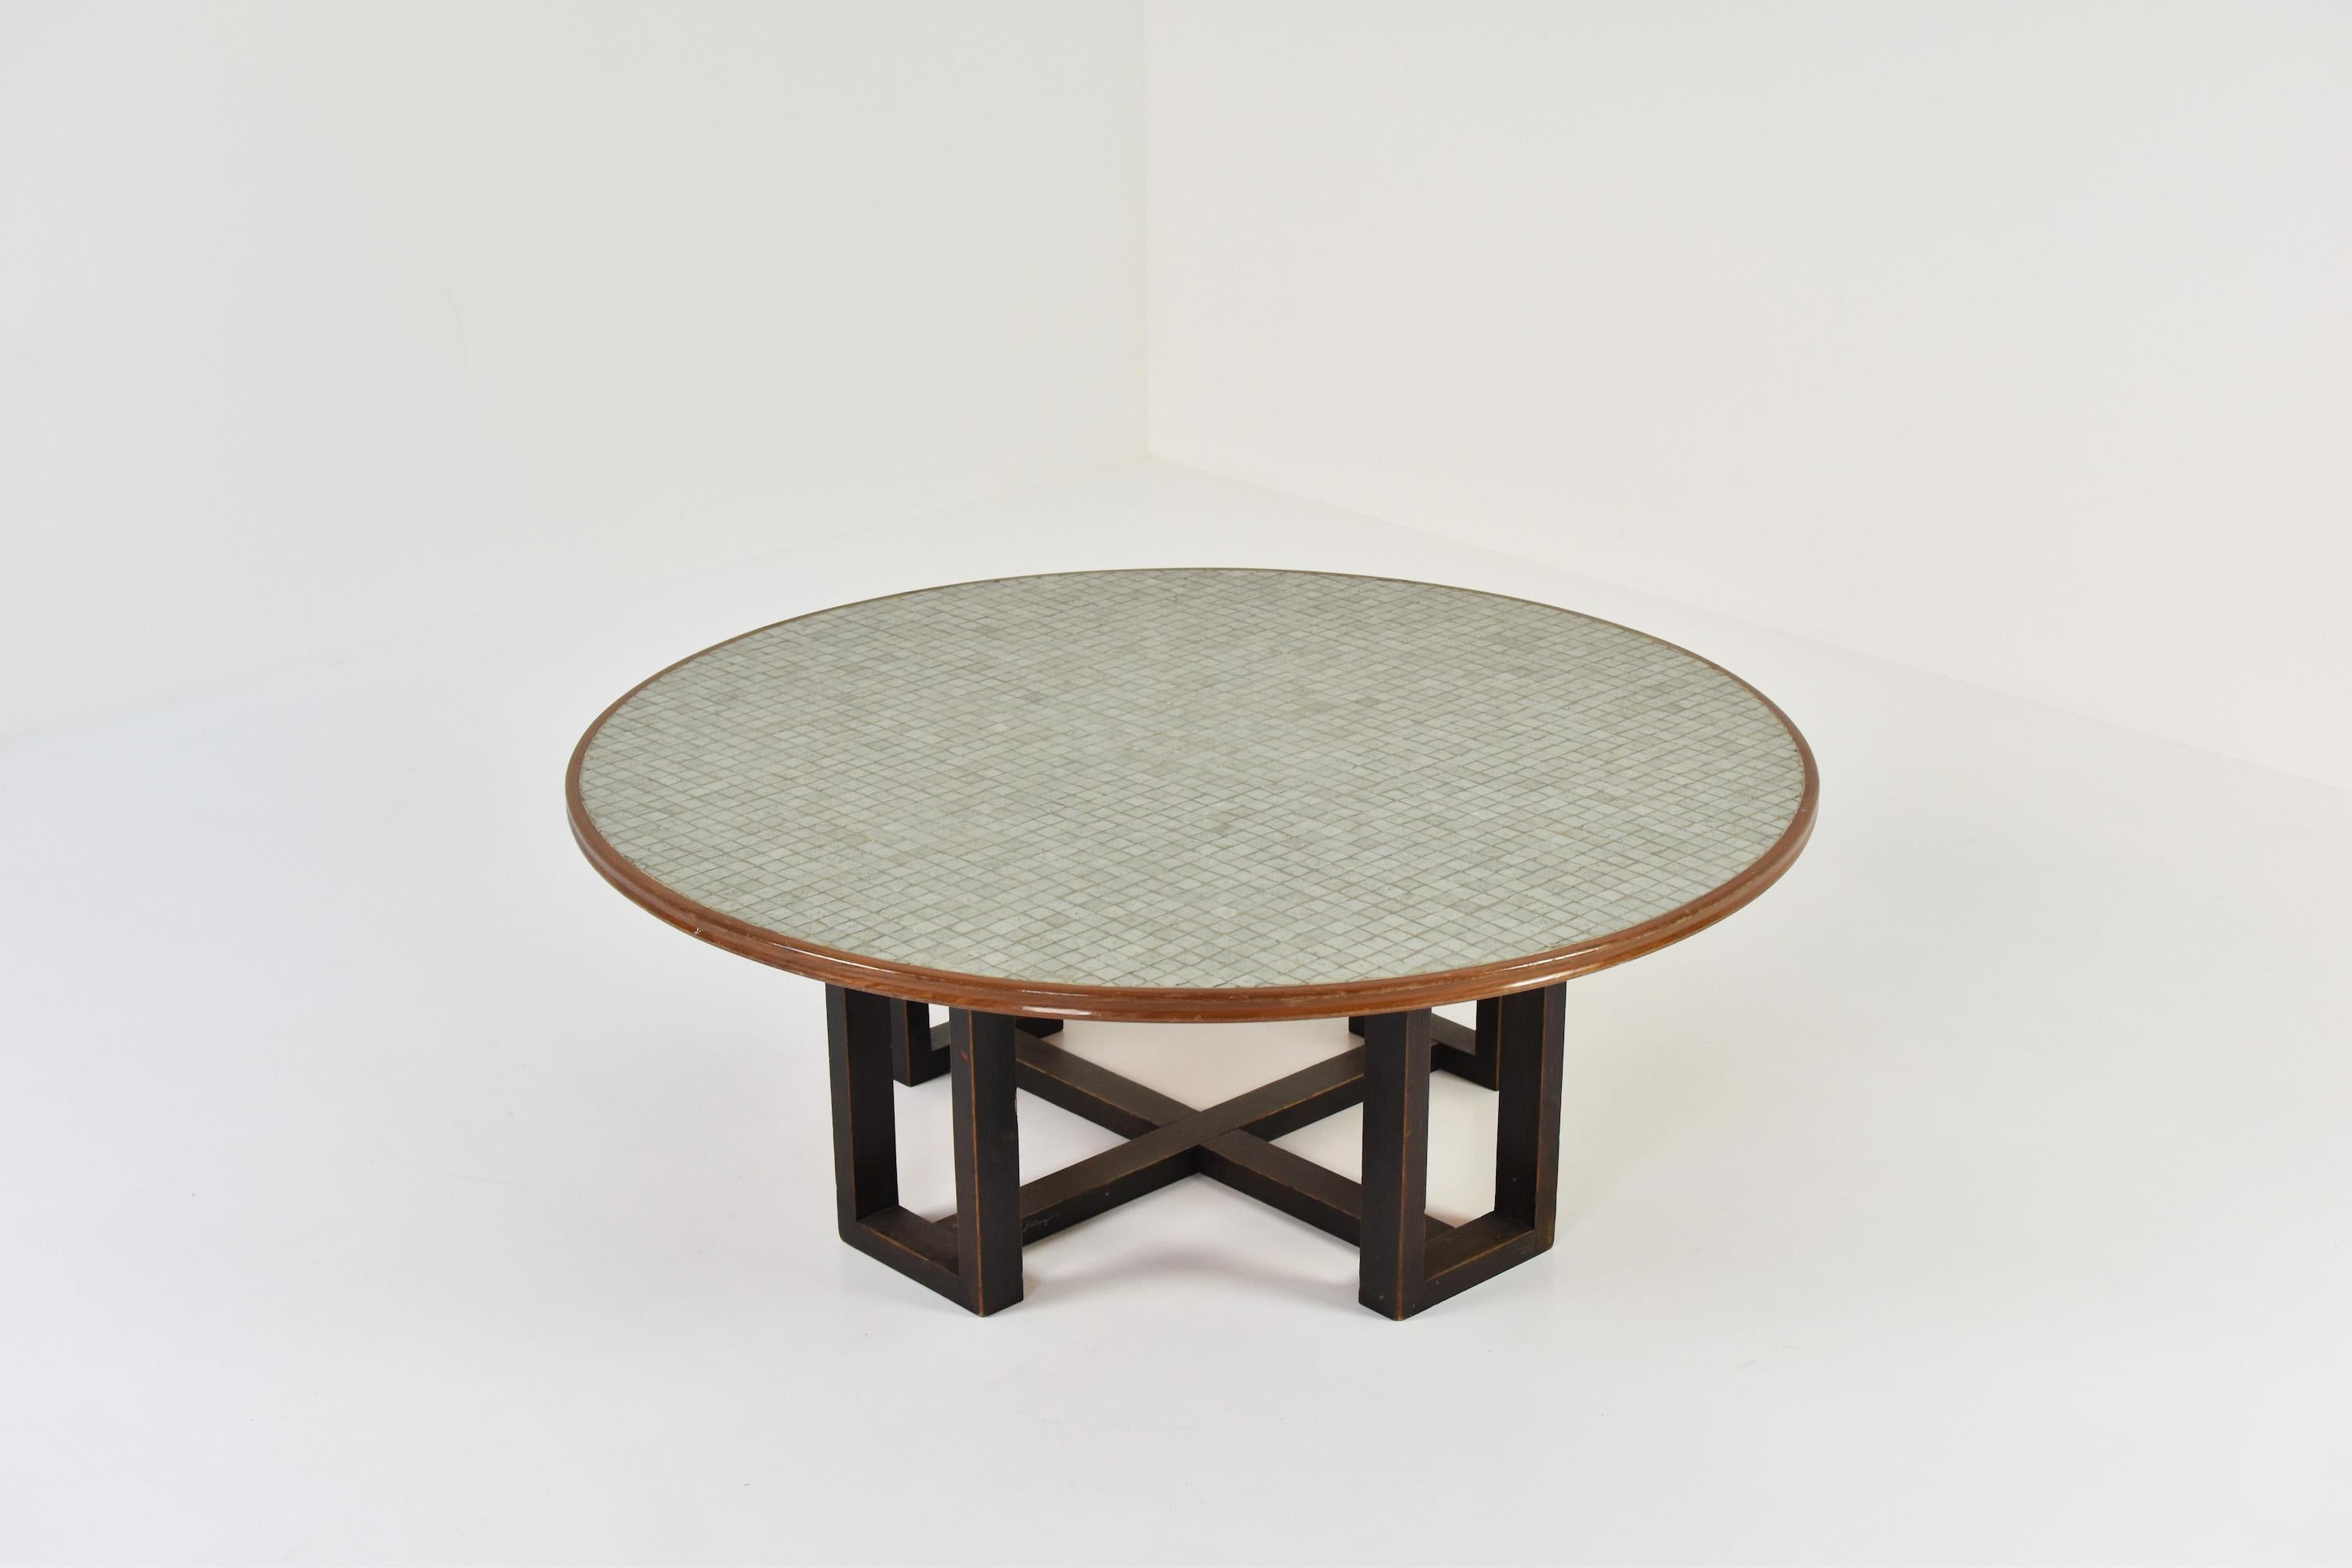 Mid-Century Modern Mosaic Coffee Table from Belgium, 1950s